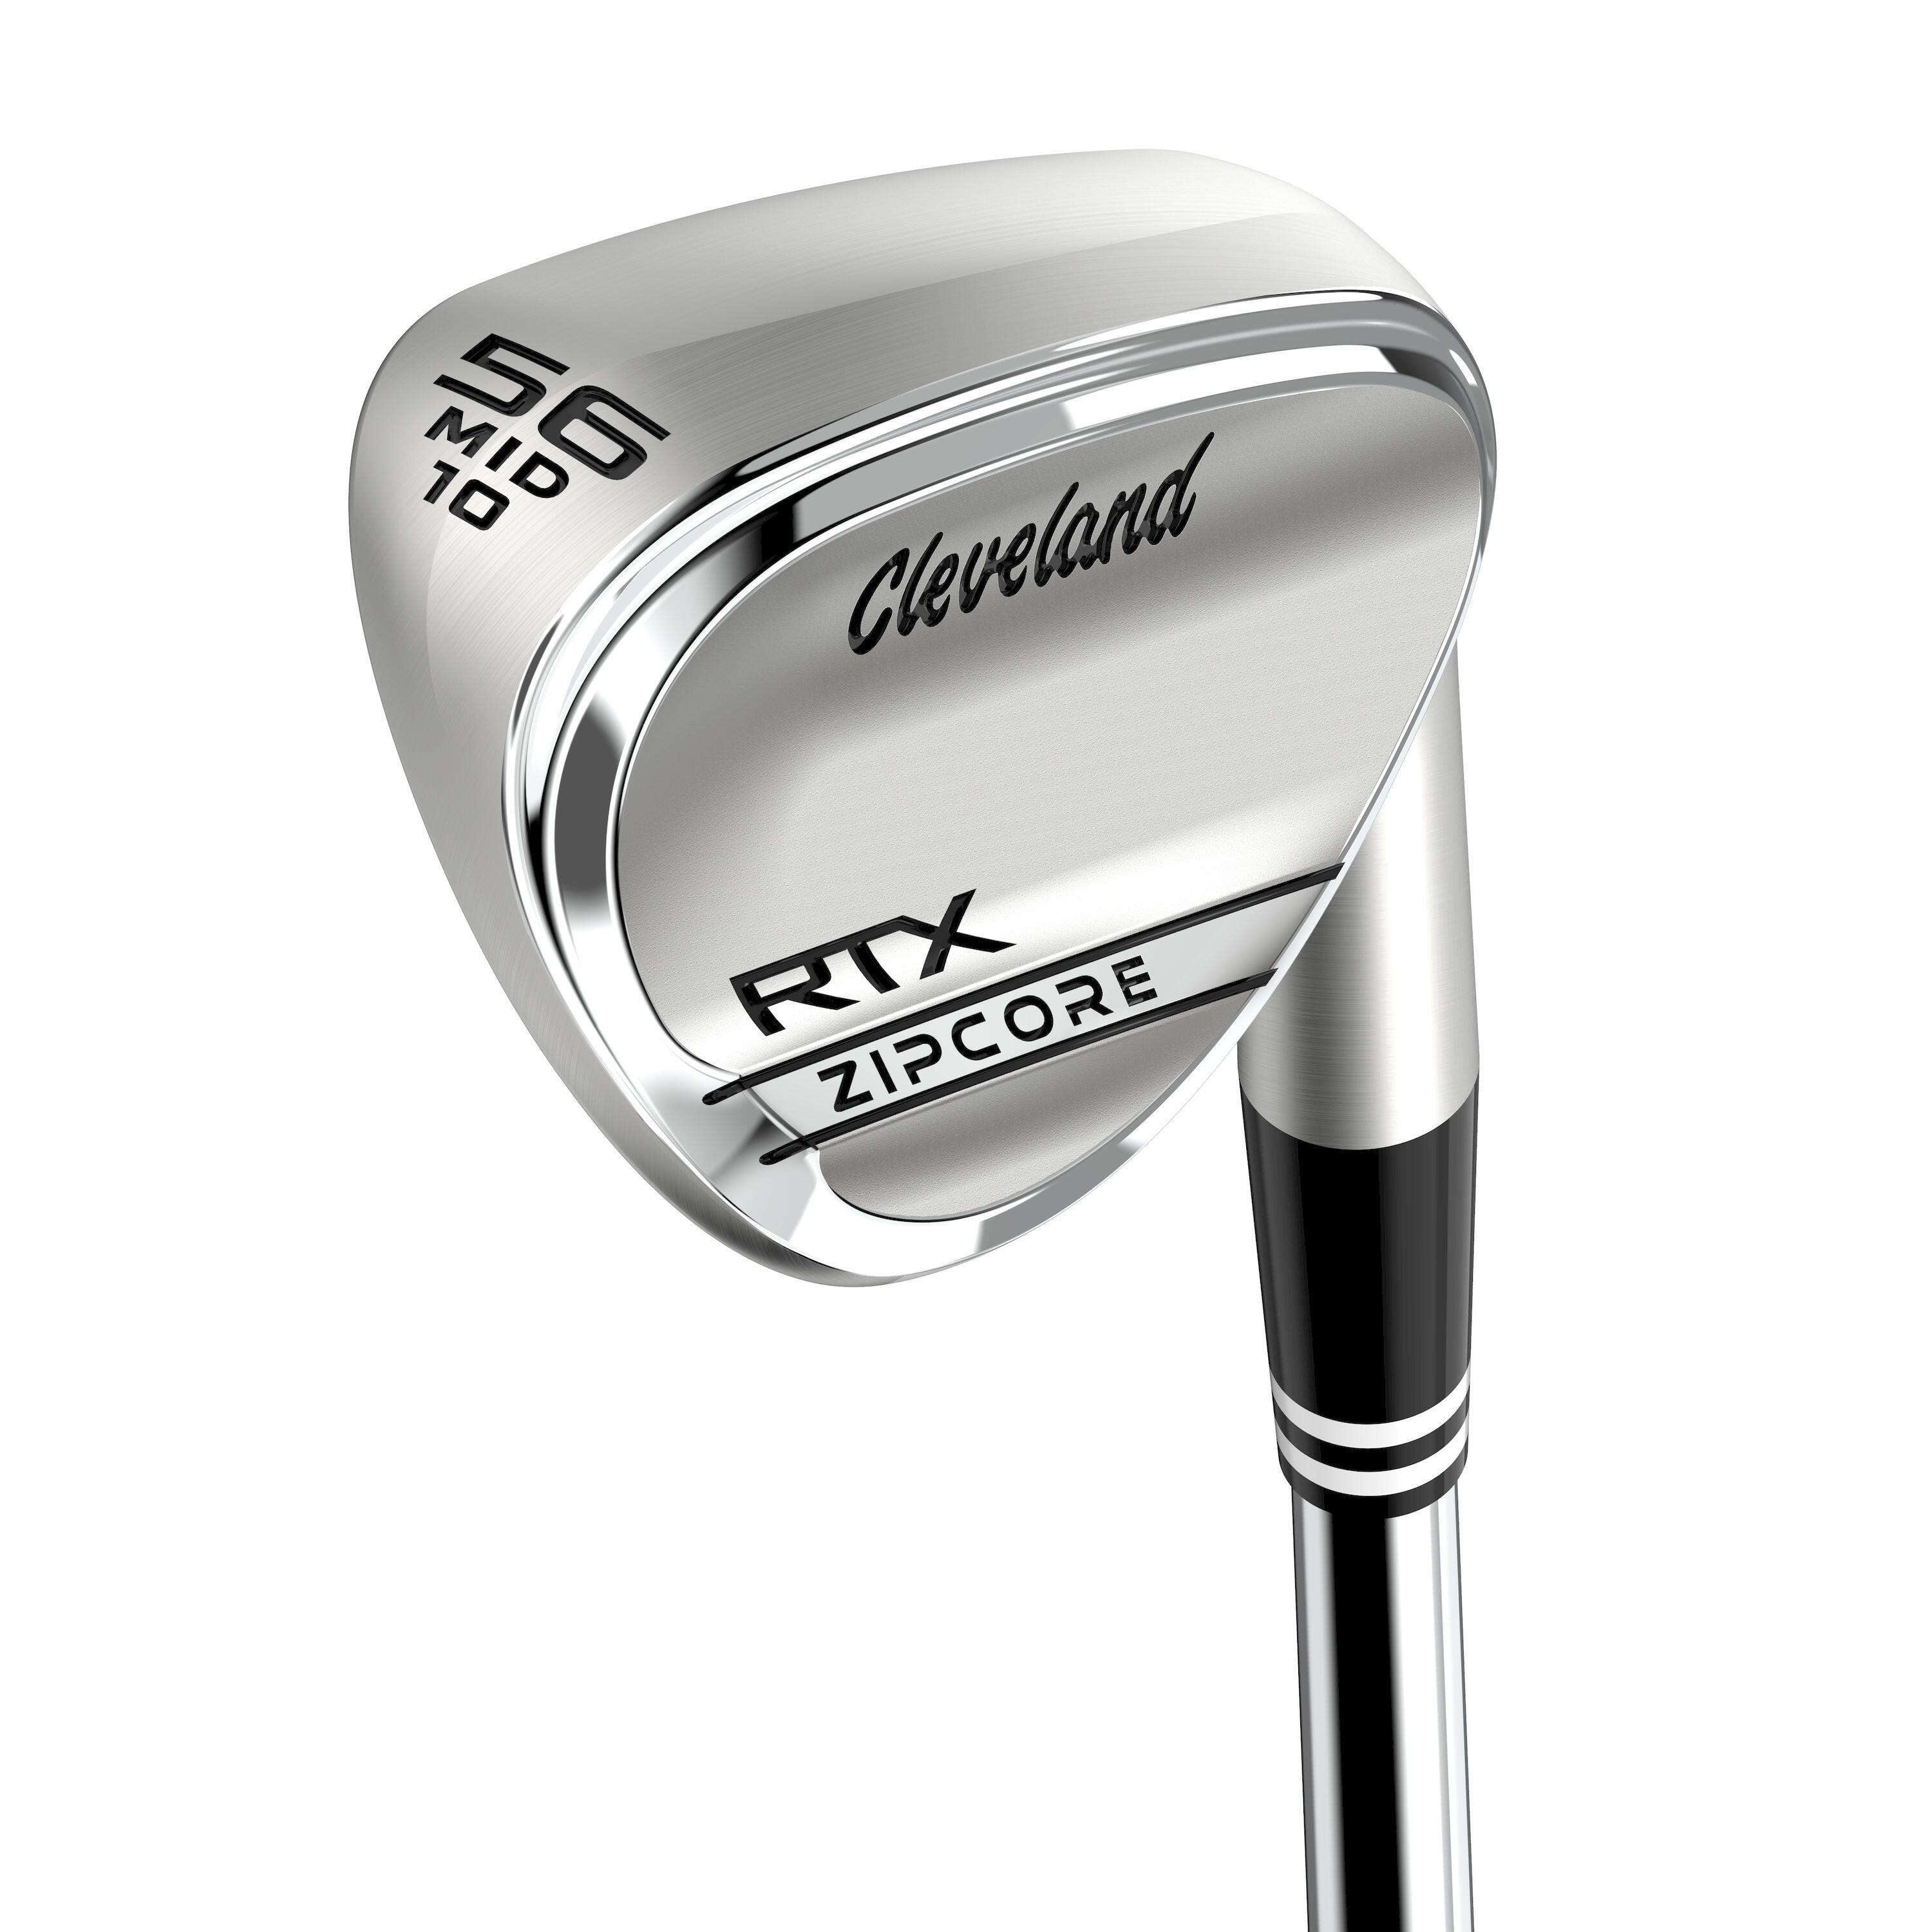 CLEVELAND GOLF Wedge Golf Homme Droitier - Cleveland Rtx6